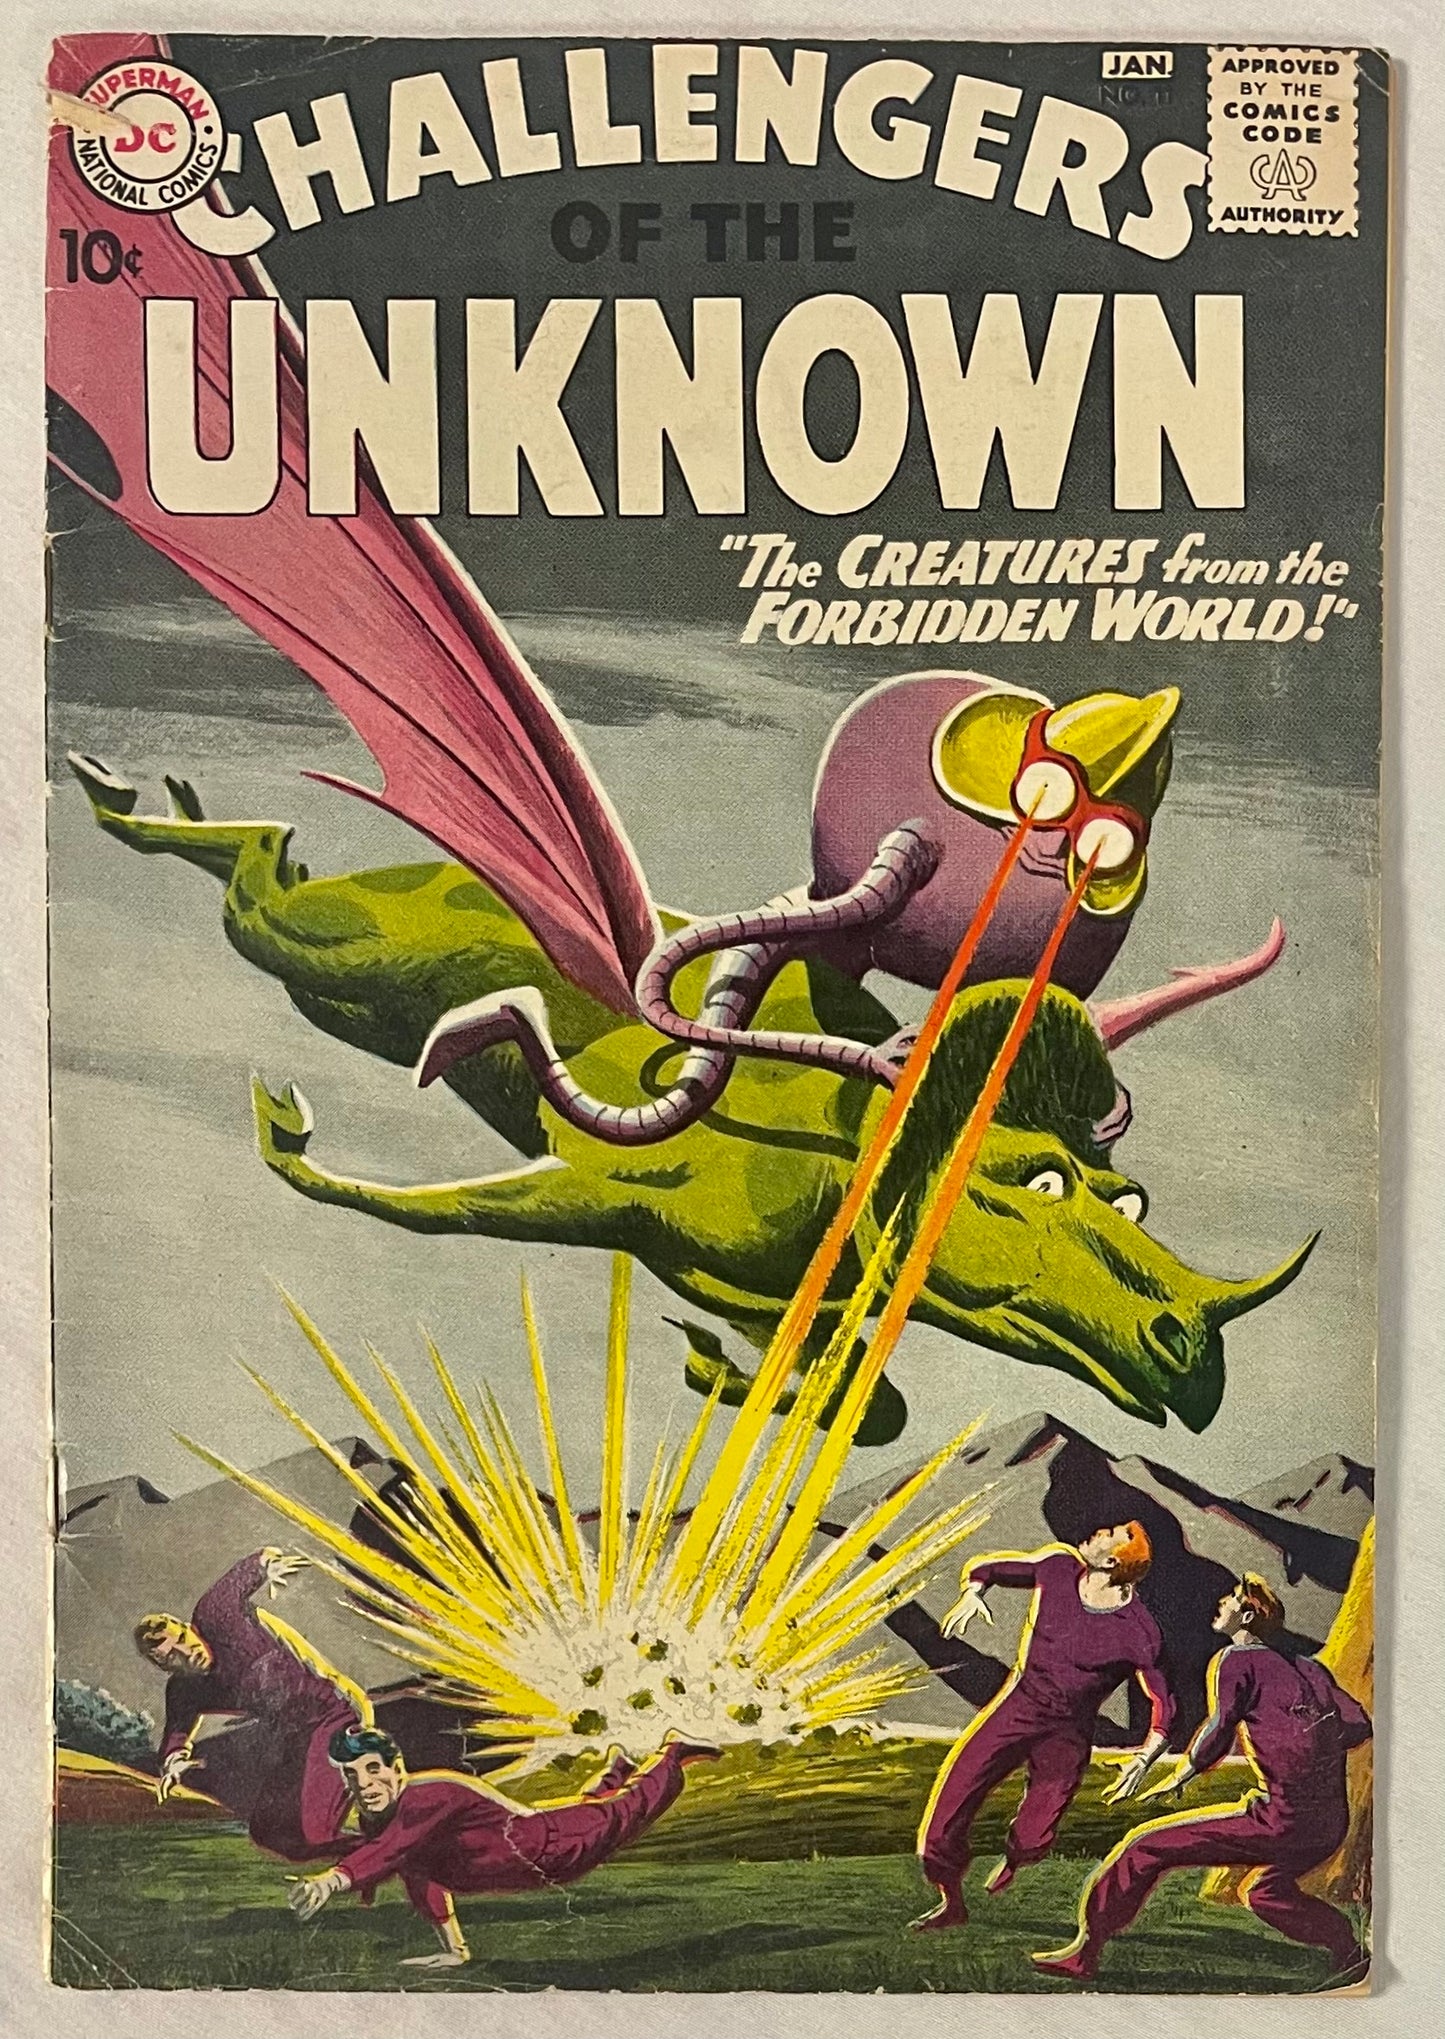 DC Comics Challengers of the Unknown No. 11